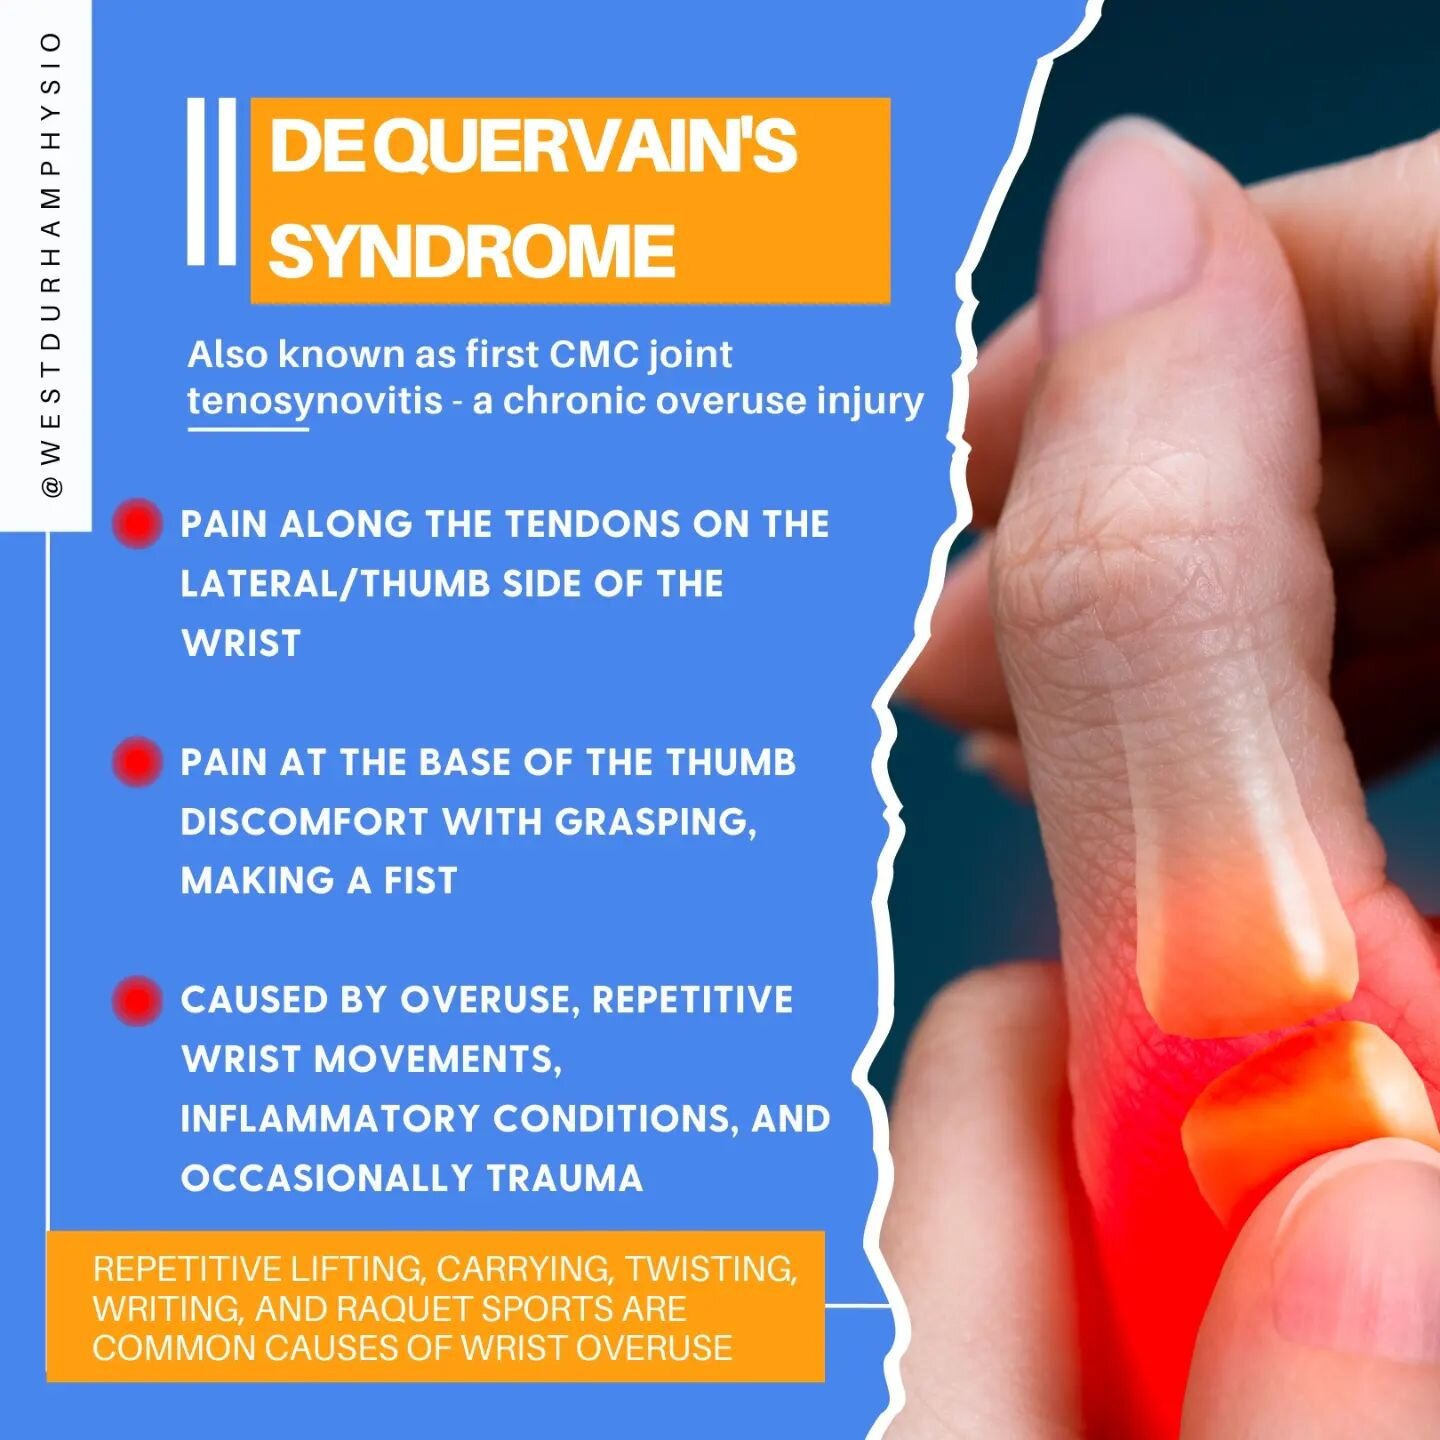 DeQuervain's Syndrome is a common cause of pain at the wrist and/or base of the thumb. It is often referred to as a repetitive overuse injury.

Know the risk factors, symptoms, and treatment options! (Swipe left 👈for more)

Contact us today to book 